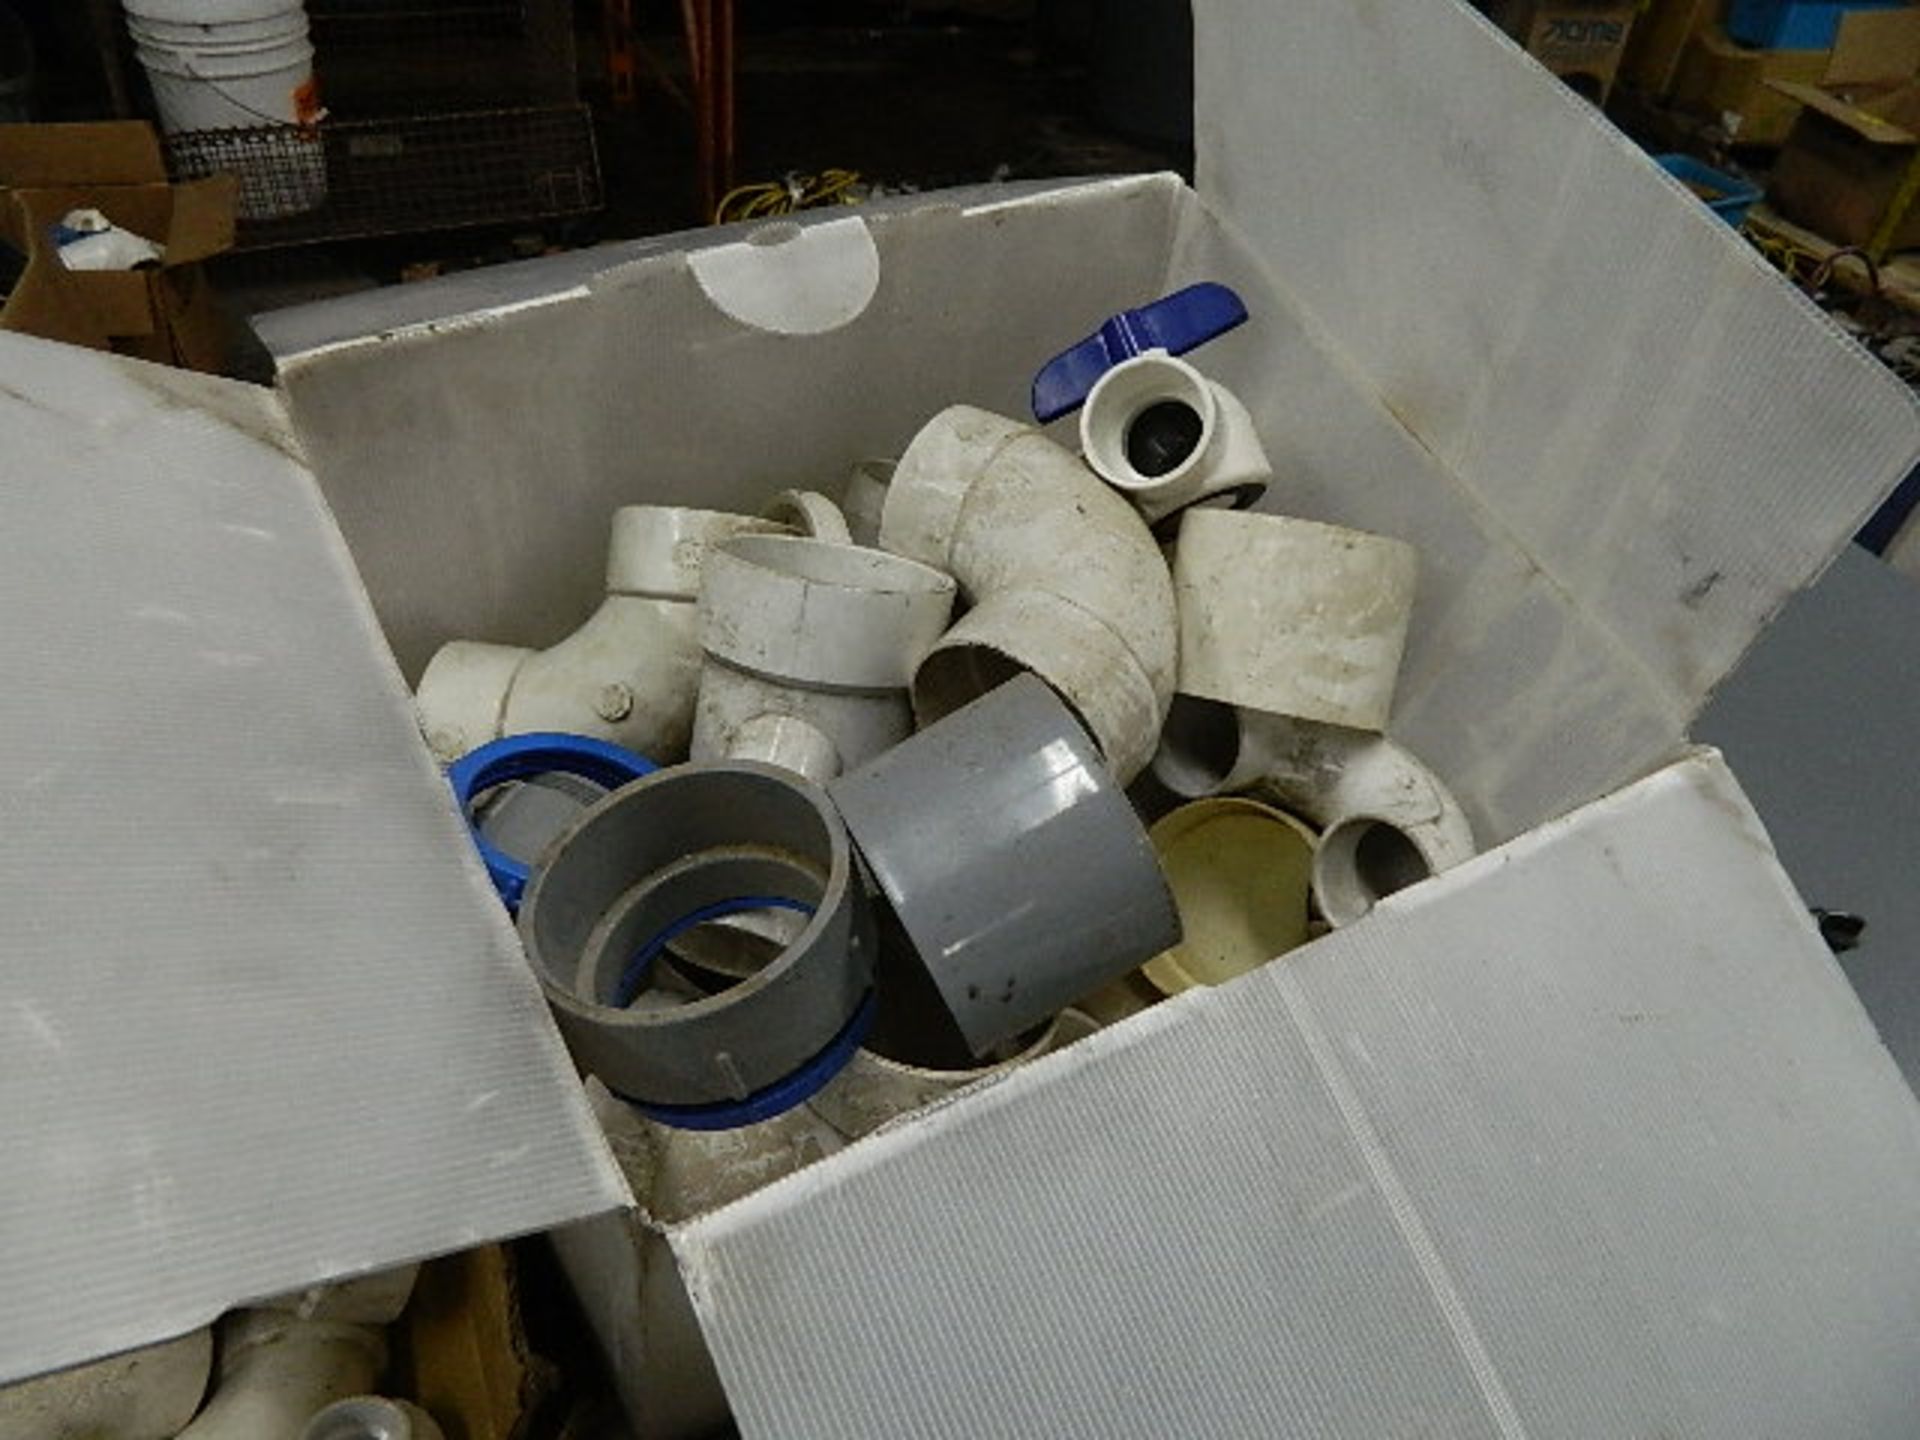 PVC Fittngs. PVC Pipe Fittings Assorted Sizes & Types - Image 3 of 3